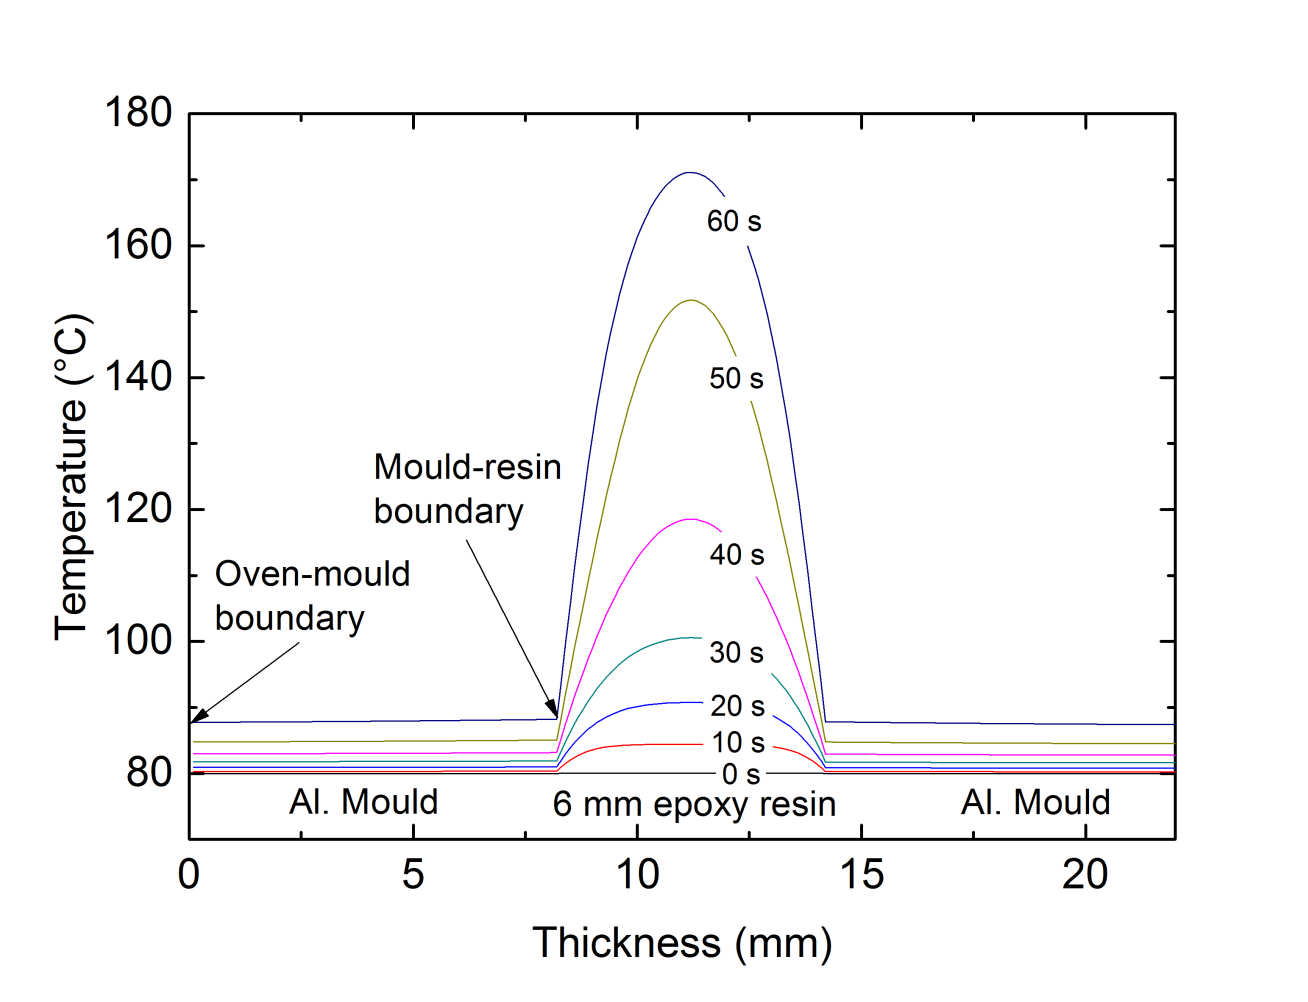 Predicted temperature distribution for fast-curing epoxy in 8 mm thick aluminium mould, showing effect of strong exothermic reaction